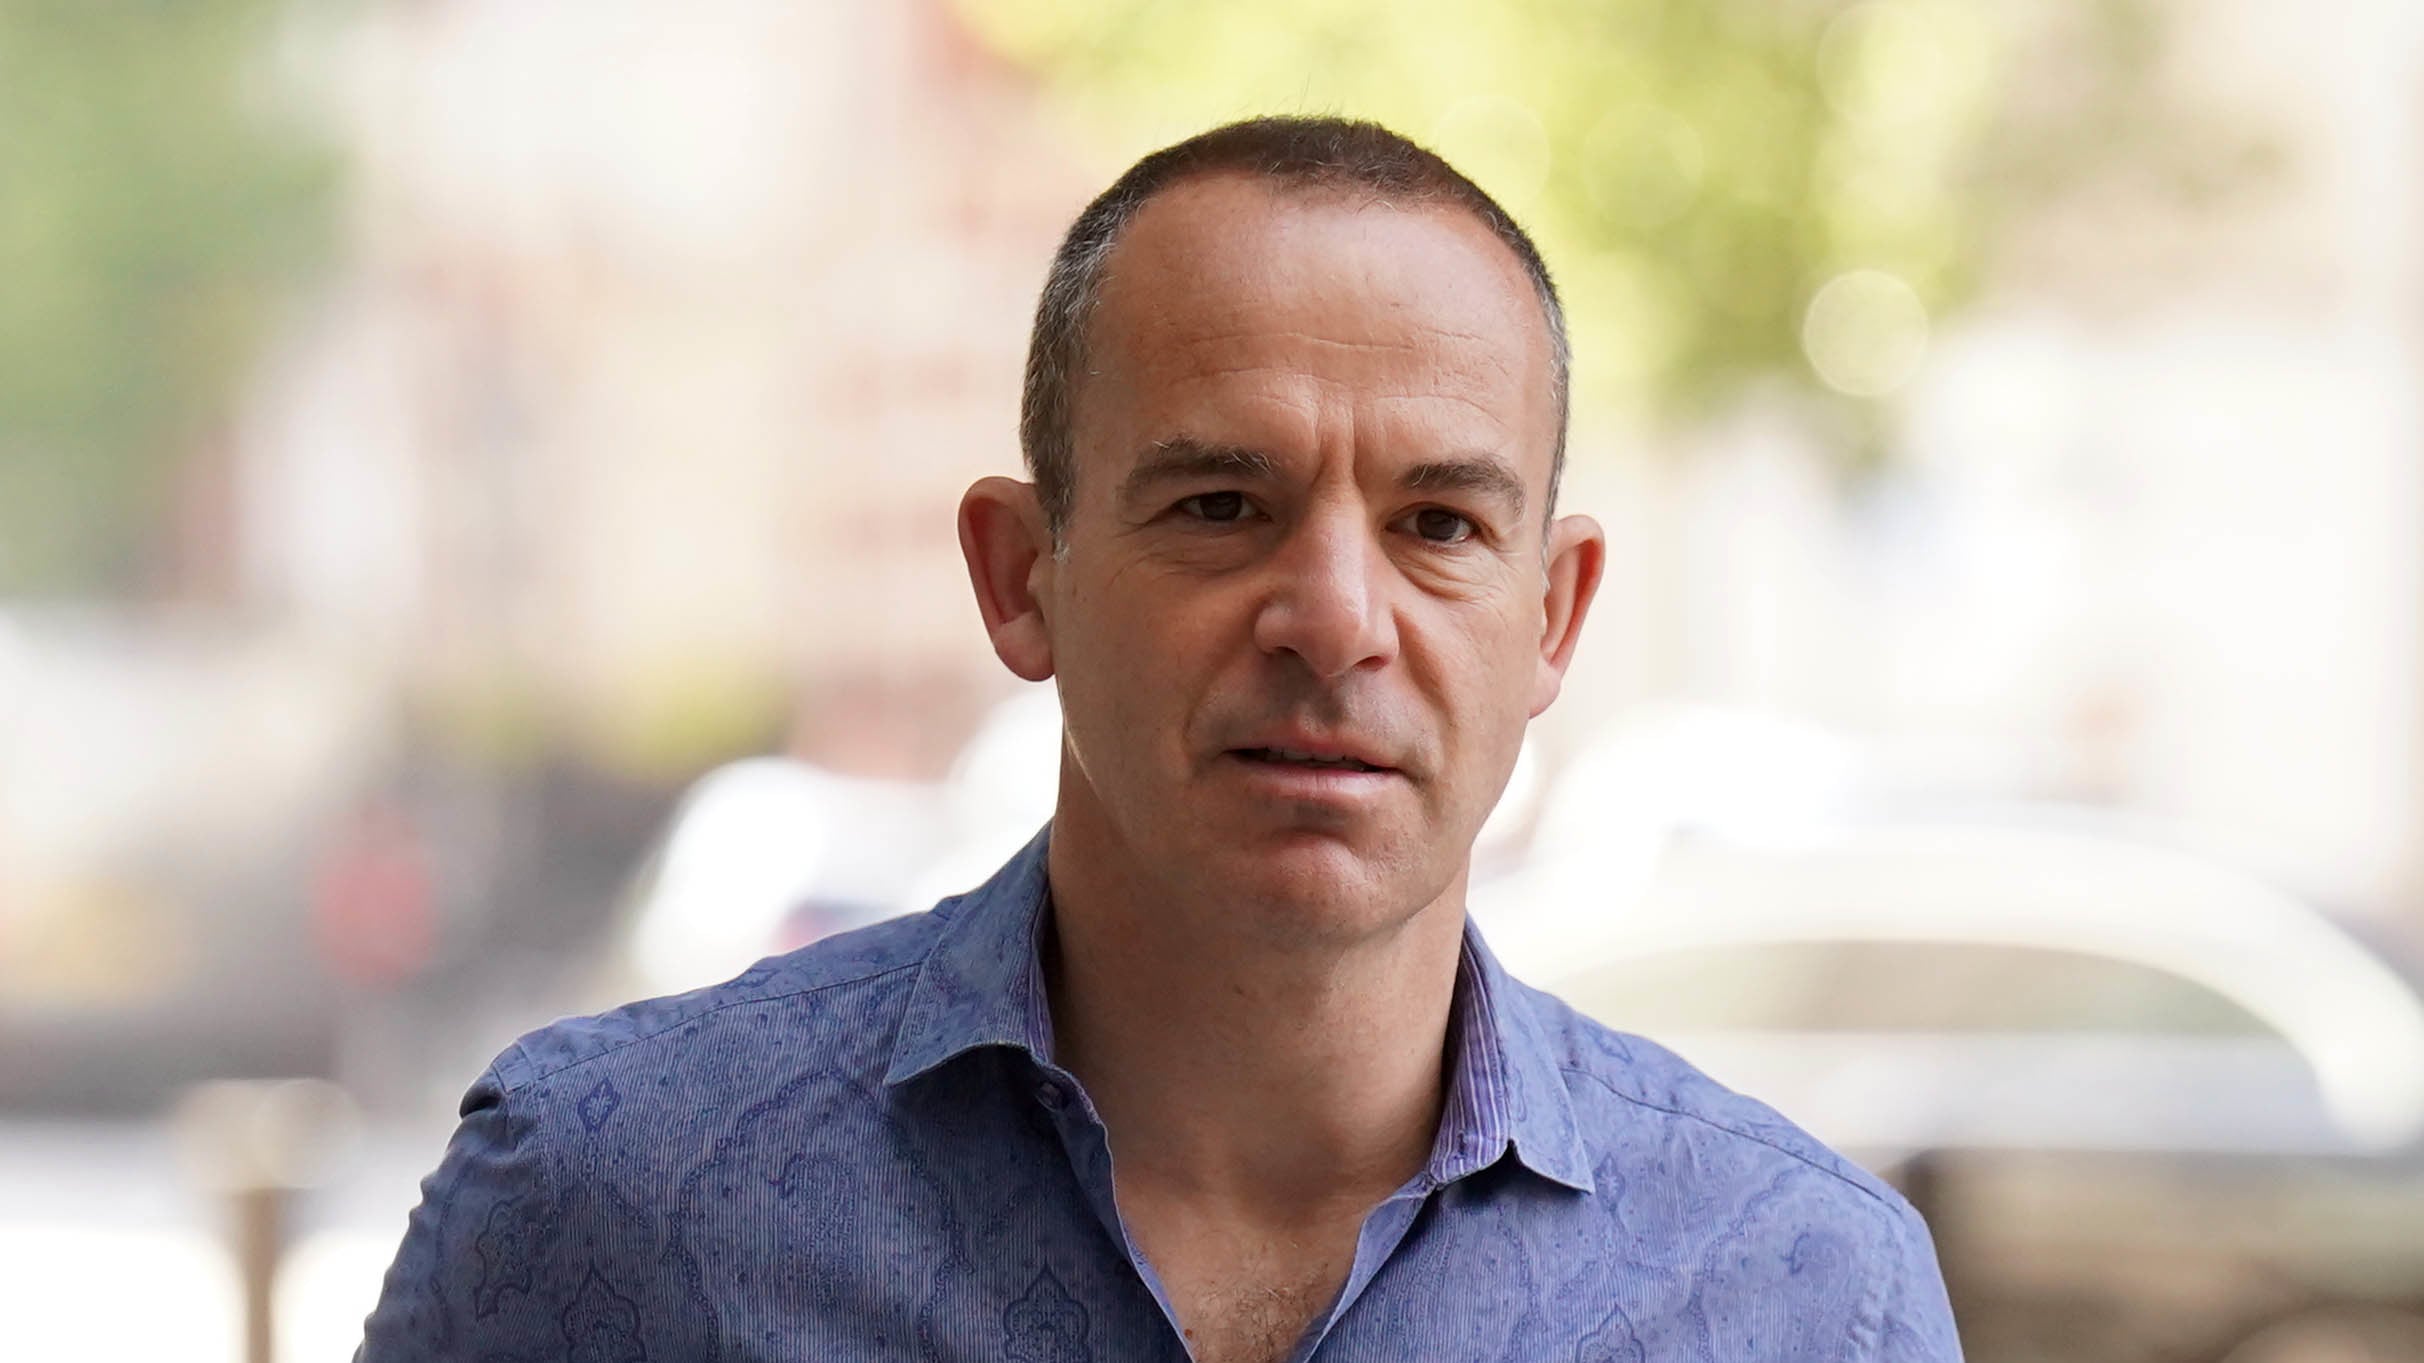 Martin Lewis had shared appeals during the police search